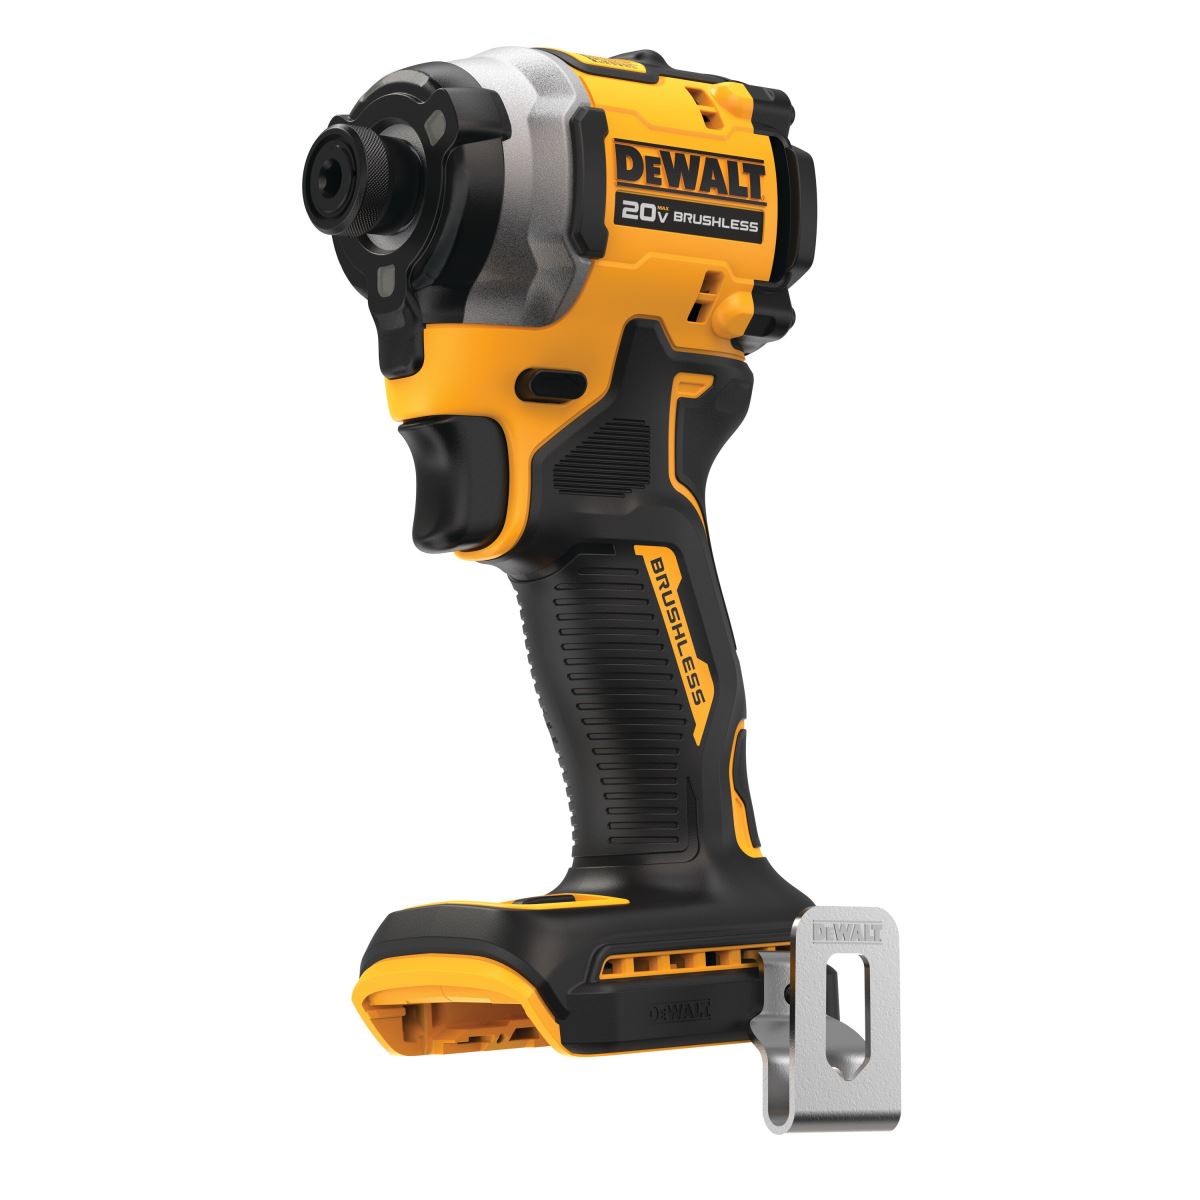 DCF850B 20V MAX ATOMIC 1/4IN 3-SPEED IMPACT DRIVER BARE TOOL from DeWalt